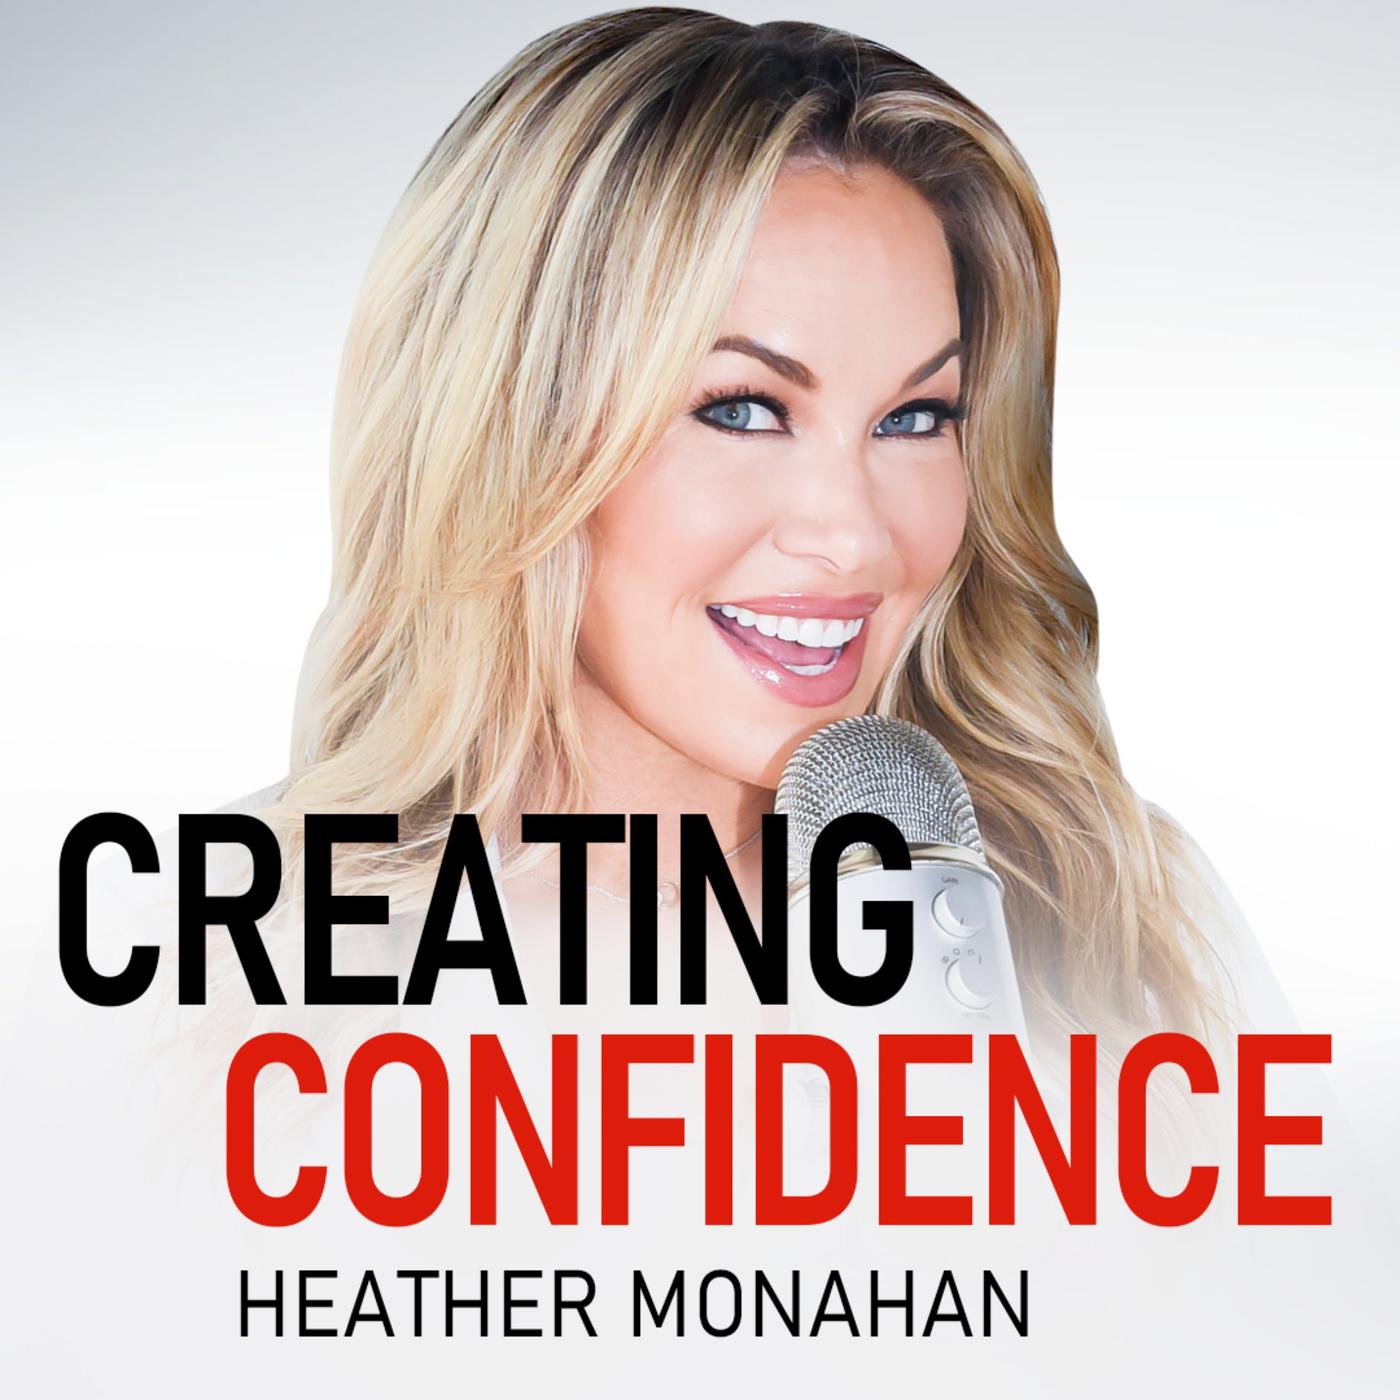 Creating Confidence